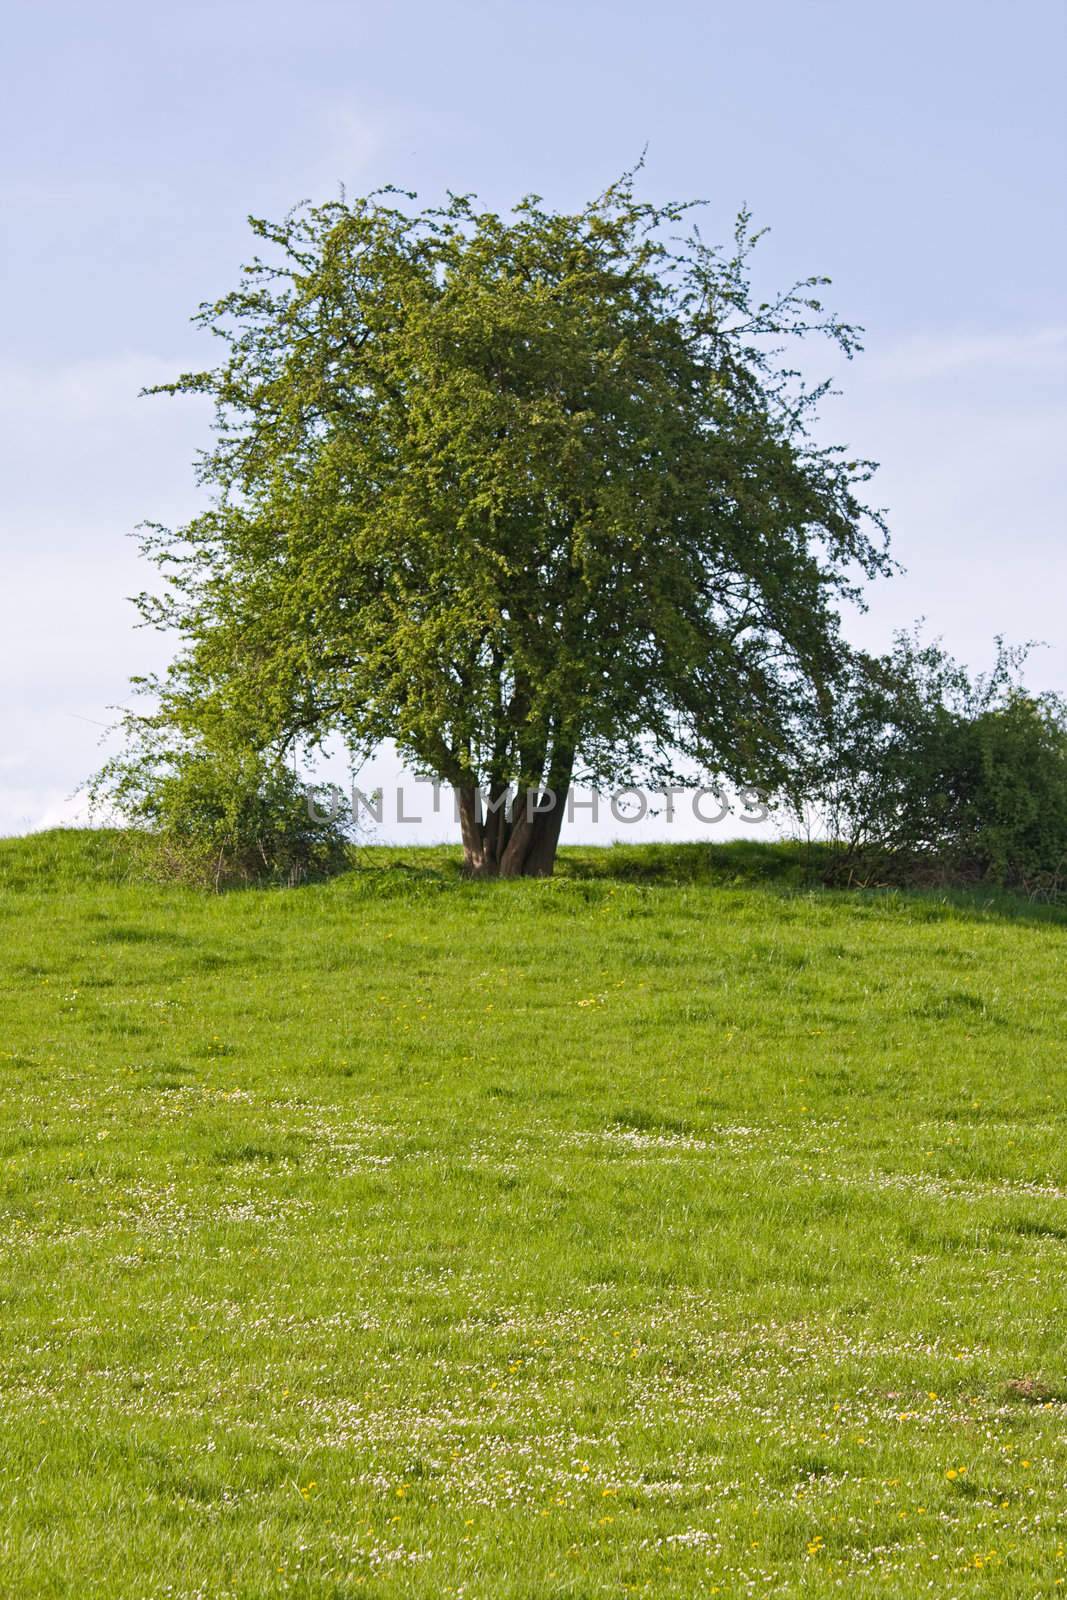 tree on a meadow on a sunny day in spring by bernjuer